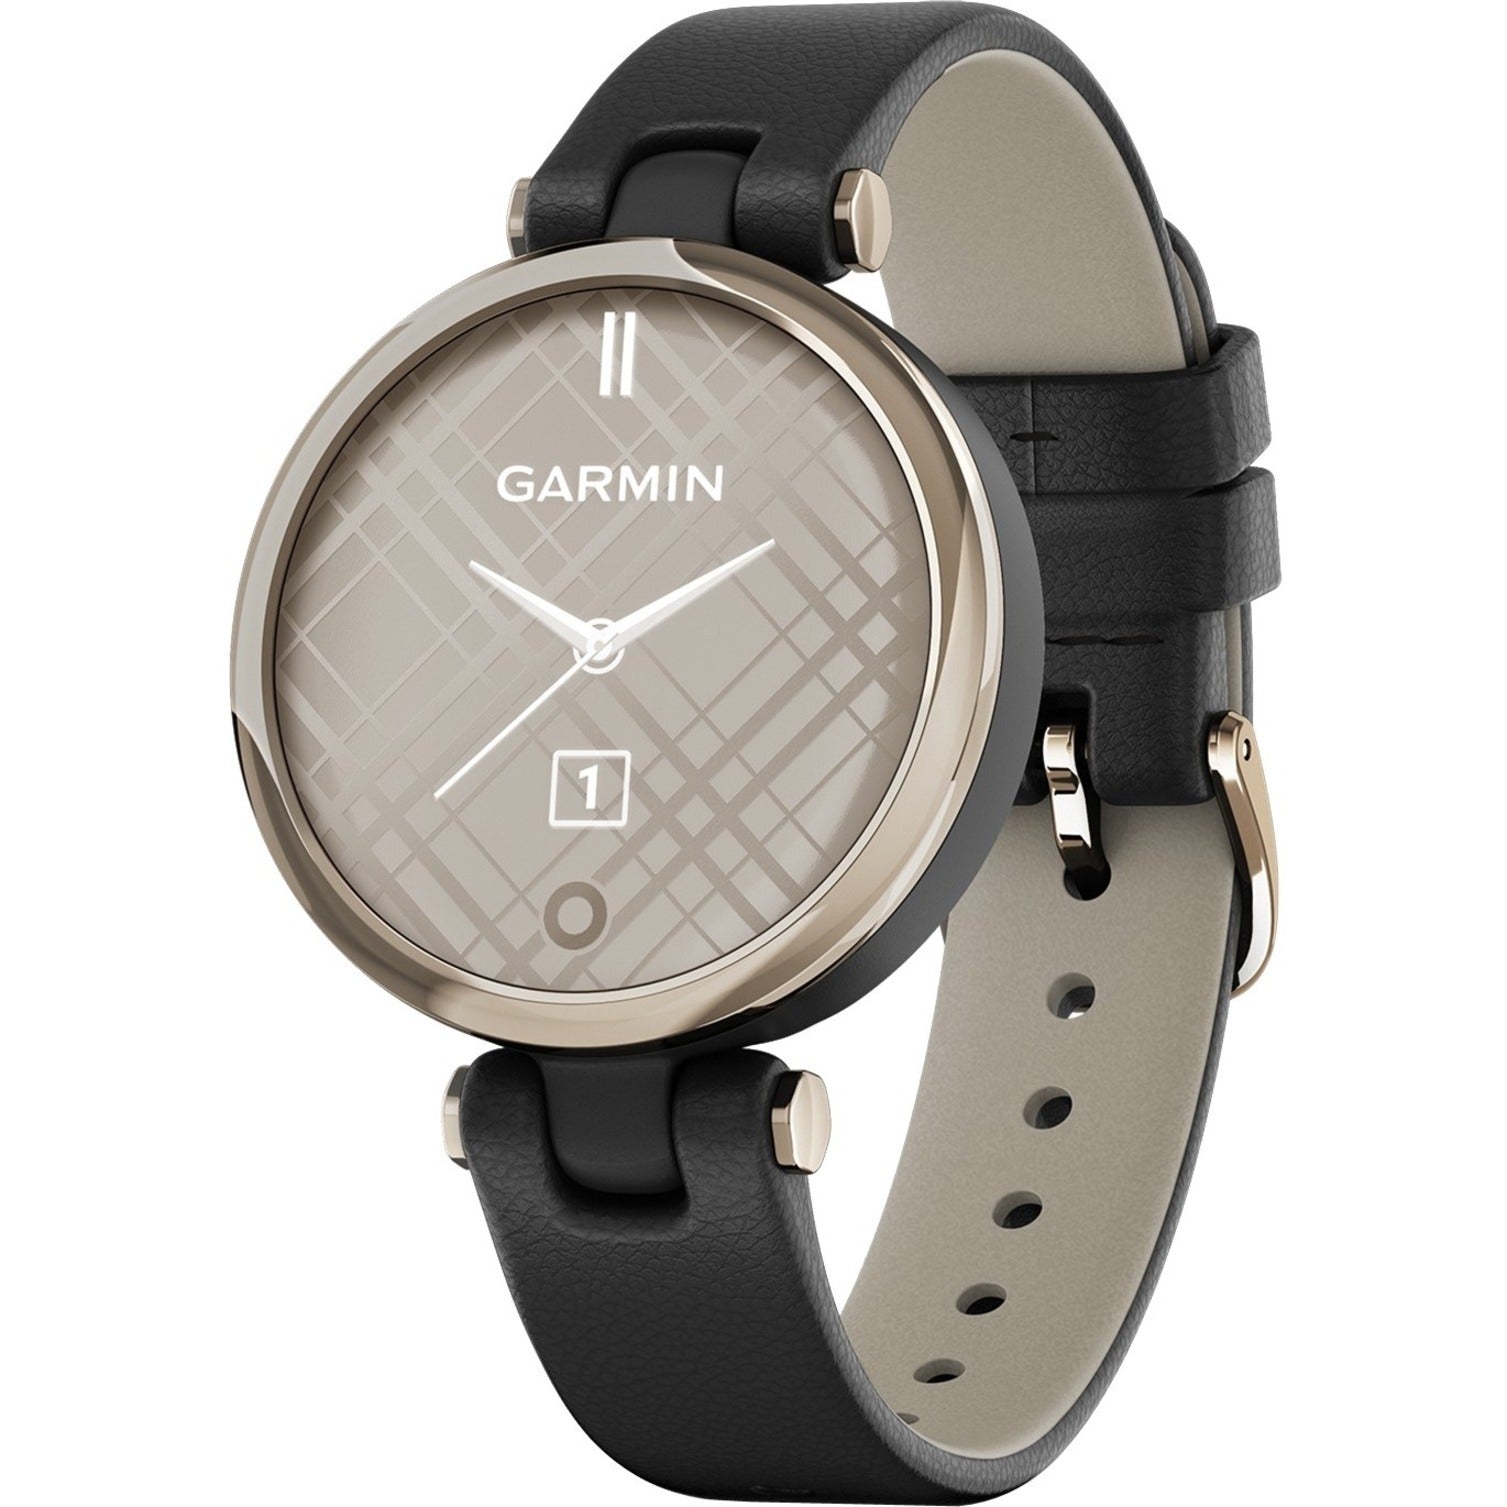 Garmin Lily Smart Watch - Water Resistant, Touchscreen, Women's Fitness Tracker [Discontinued]